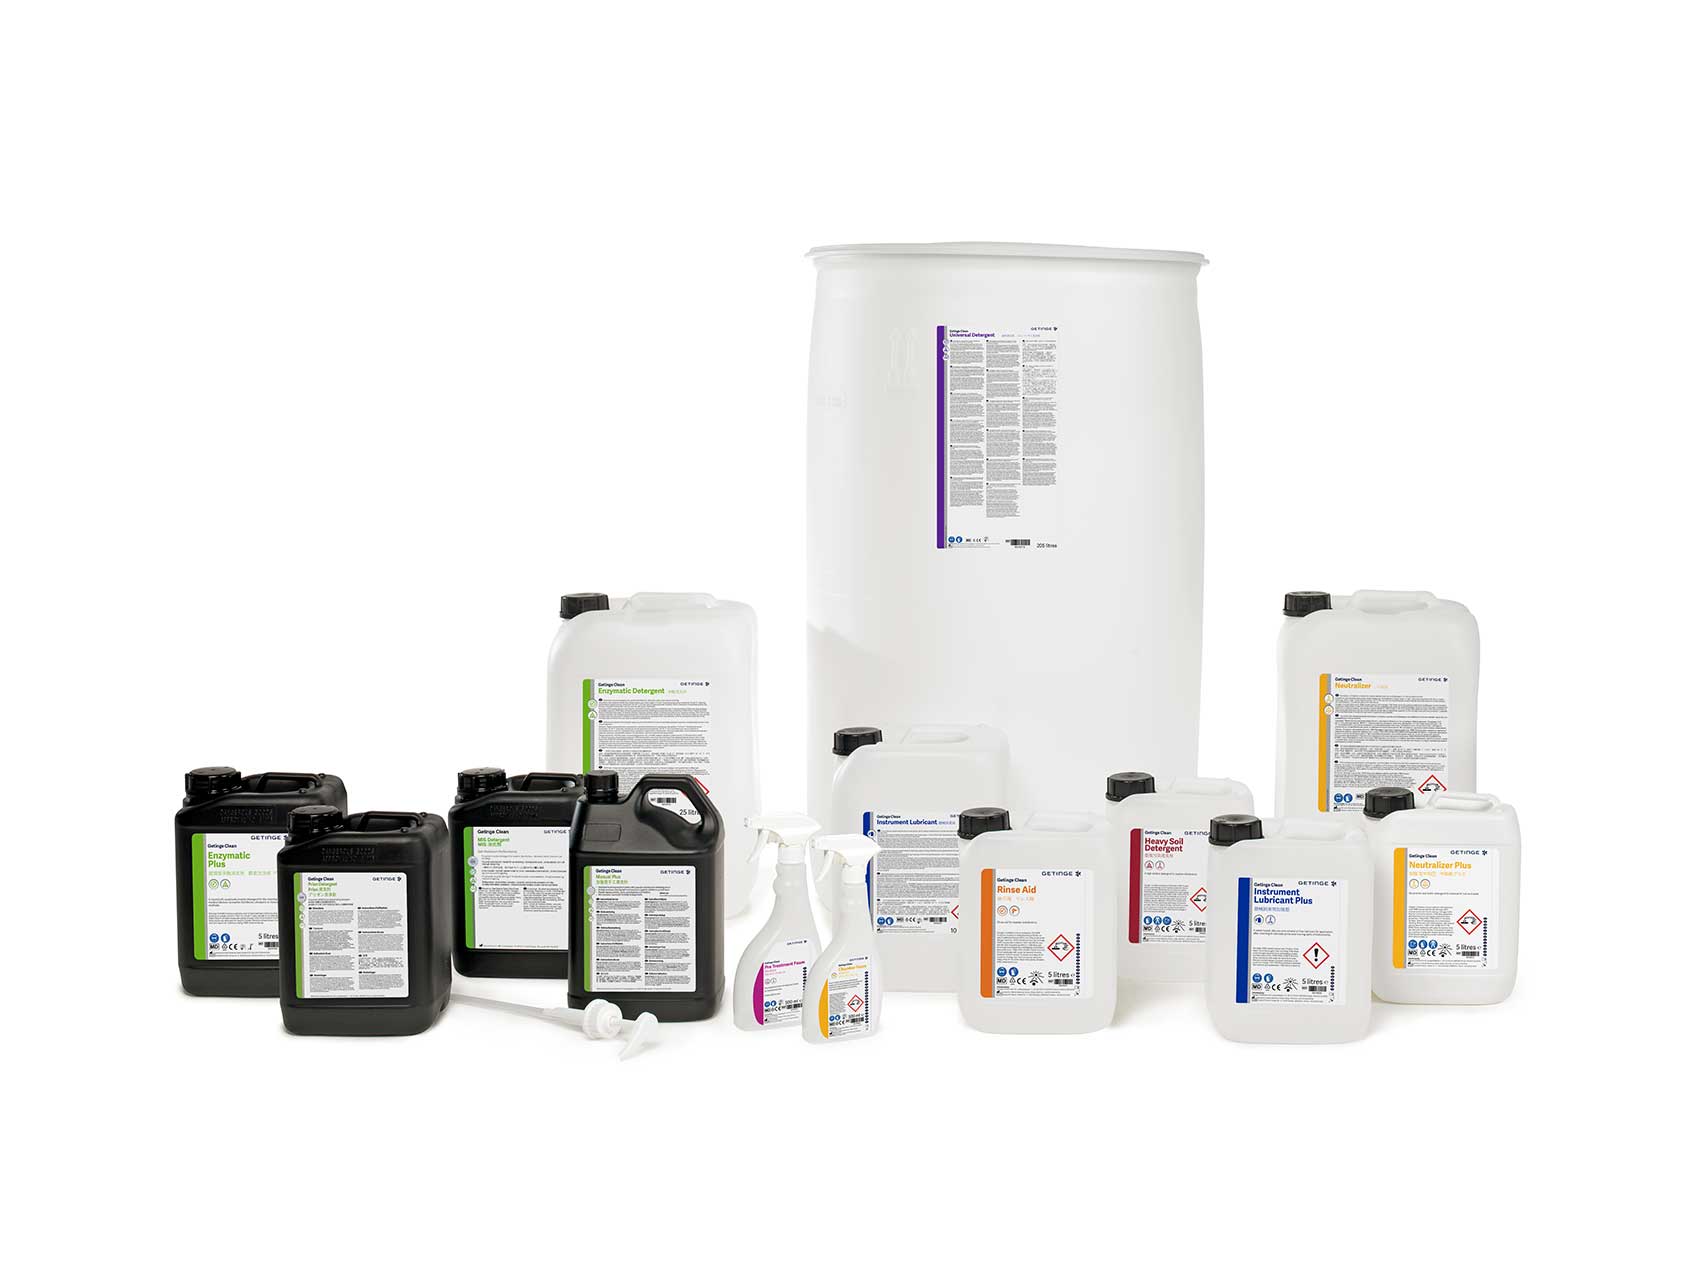 Getinge Clean offers a complete, comprehensive range of instrument cleaning detergents and maintenance products.